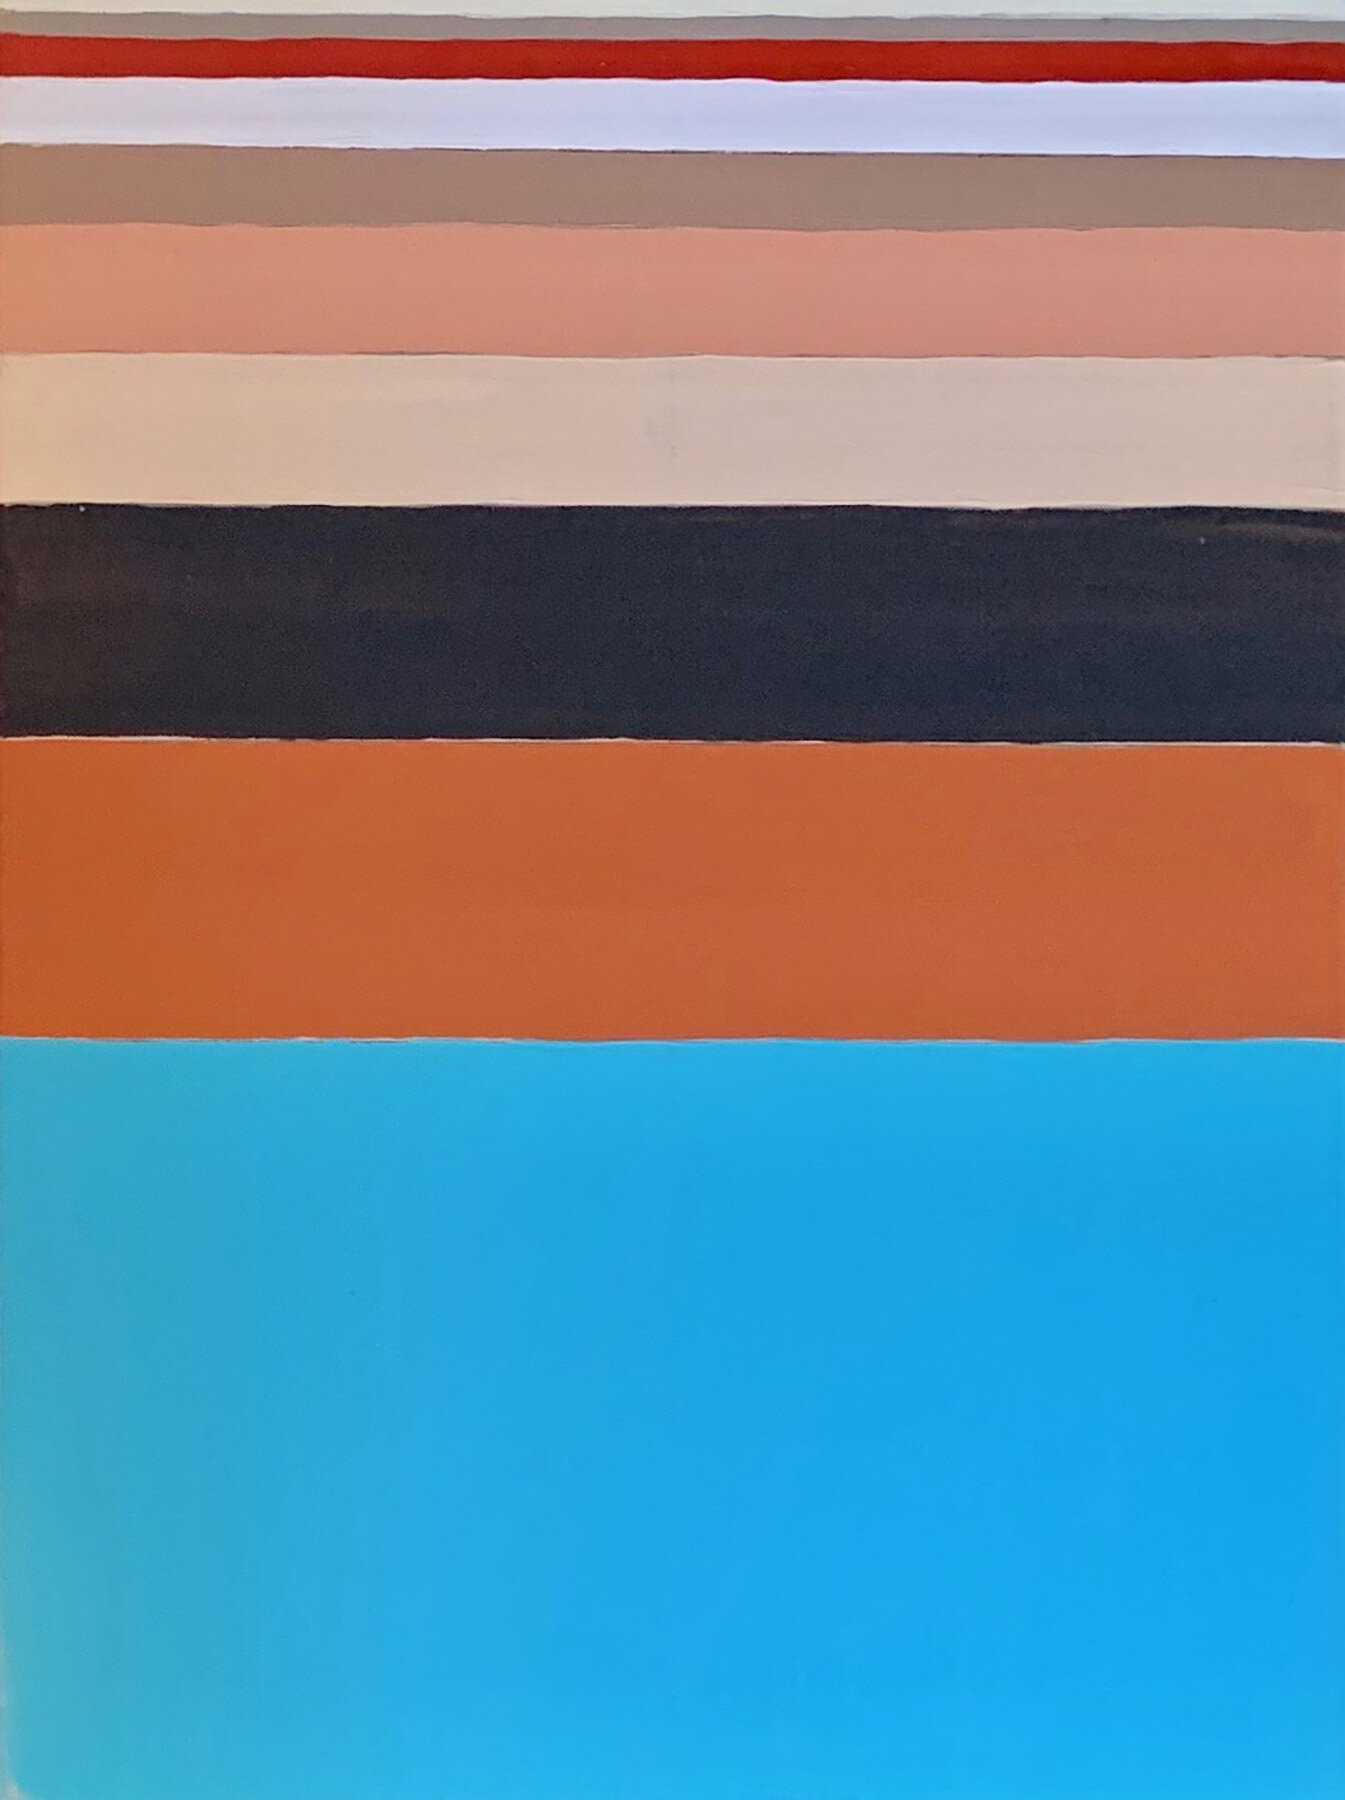 Newman_Amy Sherald and Her Stripes_3.jpg